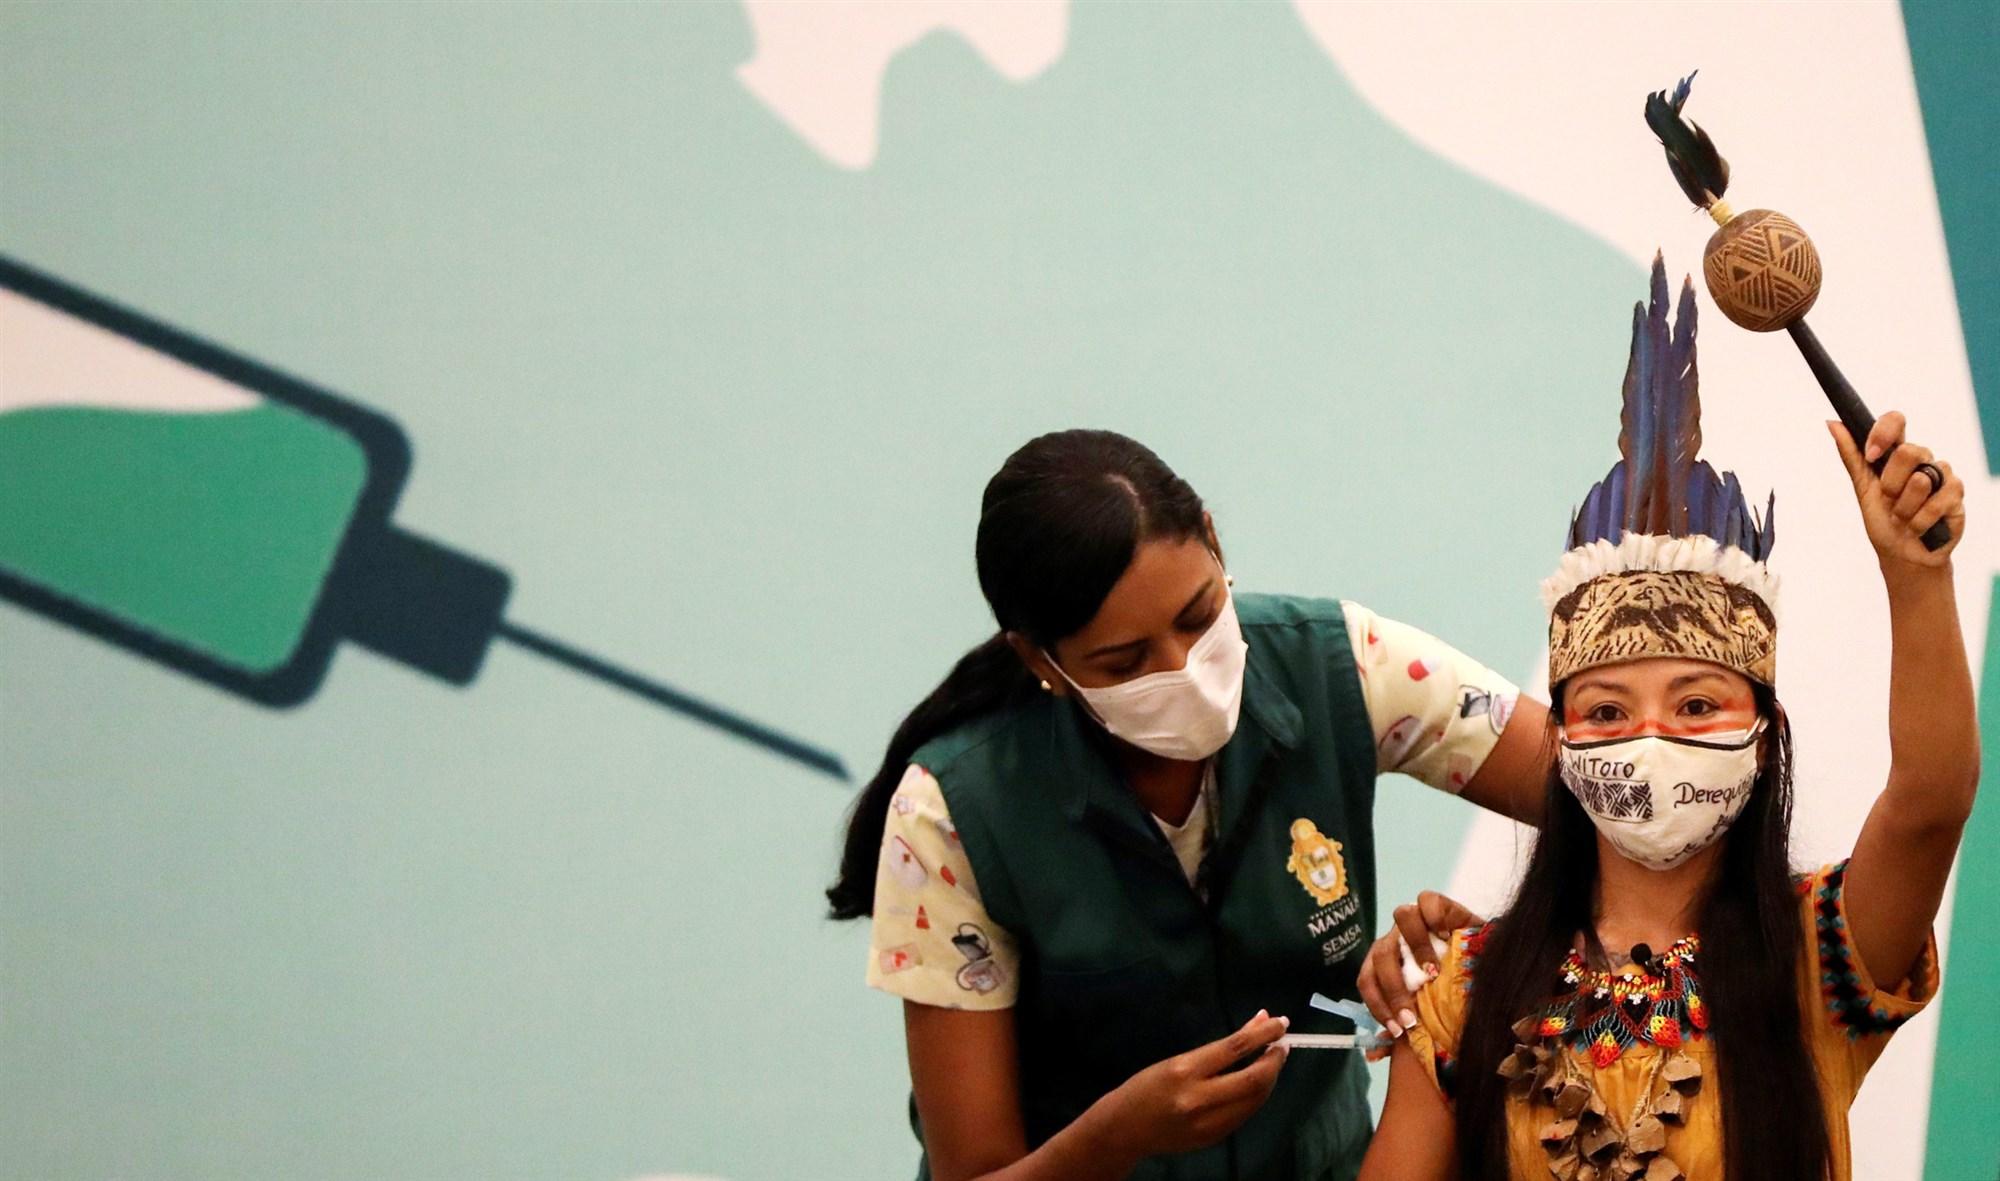 Vanderlecia Ortega dos Santos, or Vanda, from the Witoto indigenous tribe, receives a Covid-19 vaccine in Manaus, Brazil, on Jan. 18, 2021. Bruno Kelly / Reuters